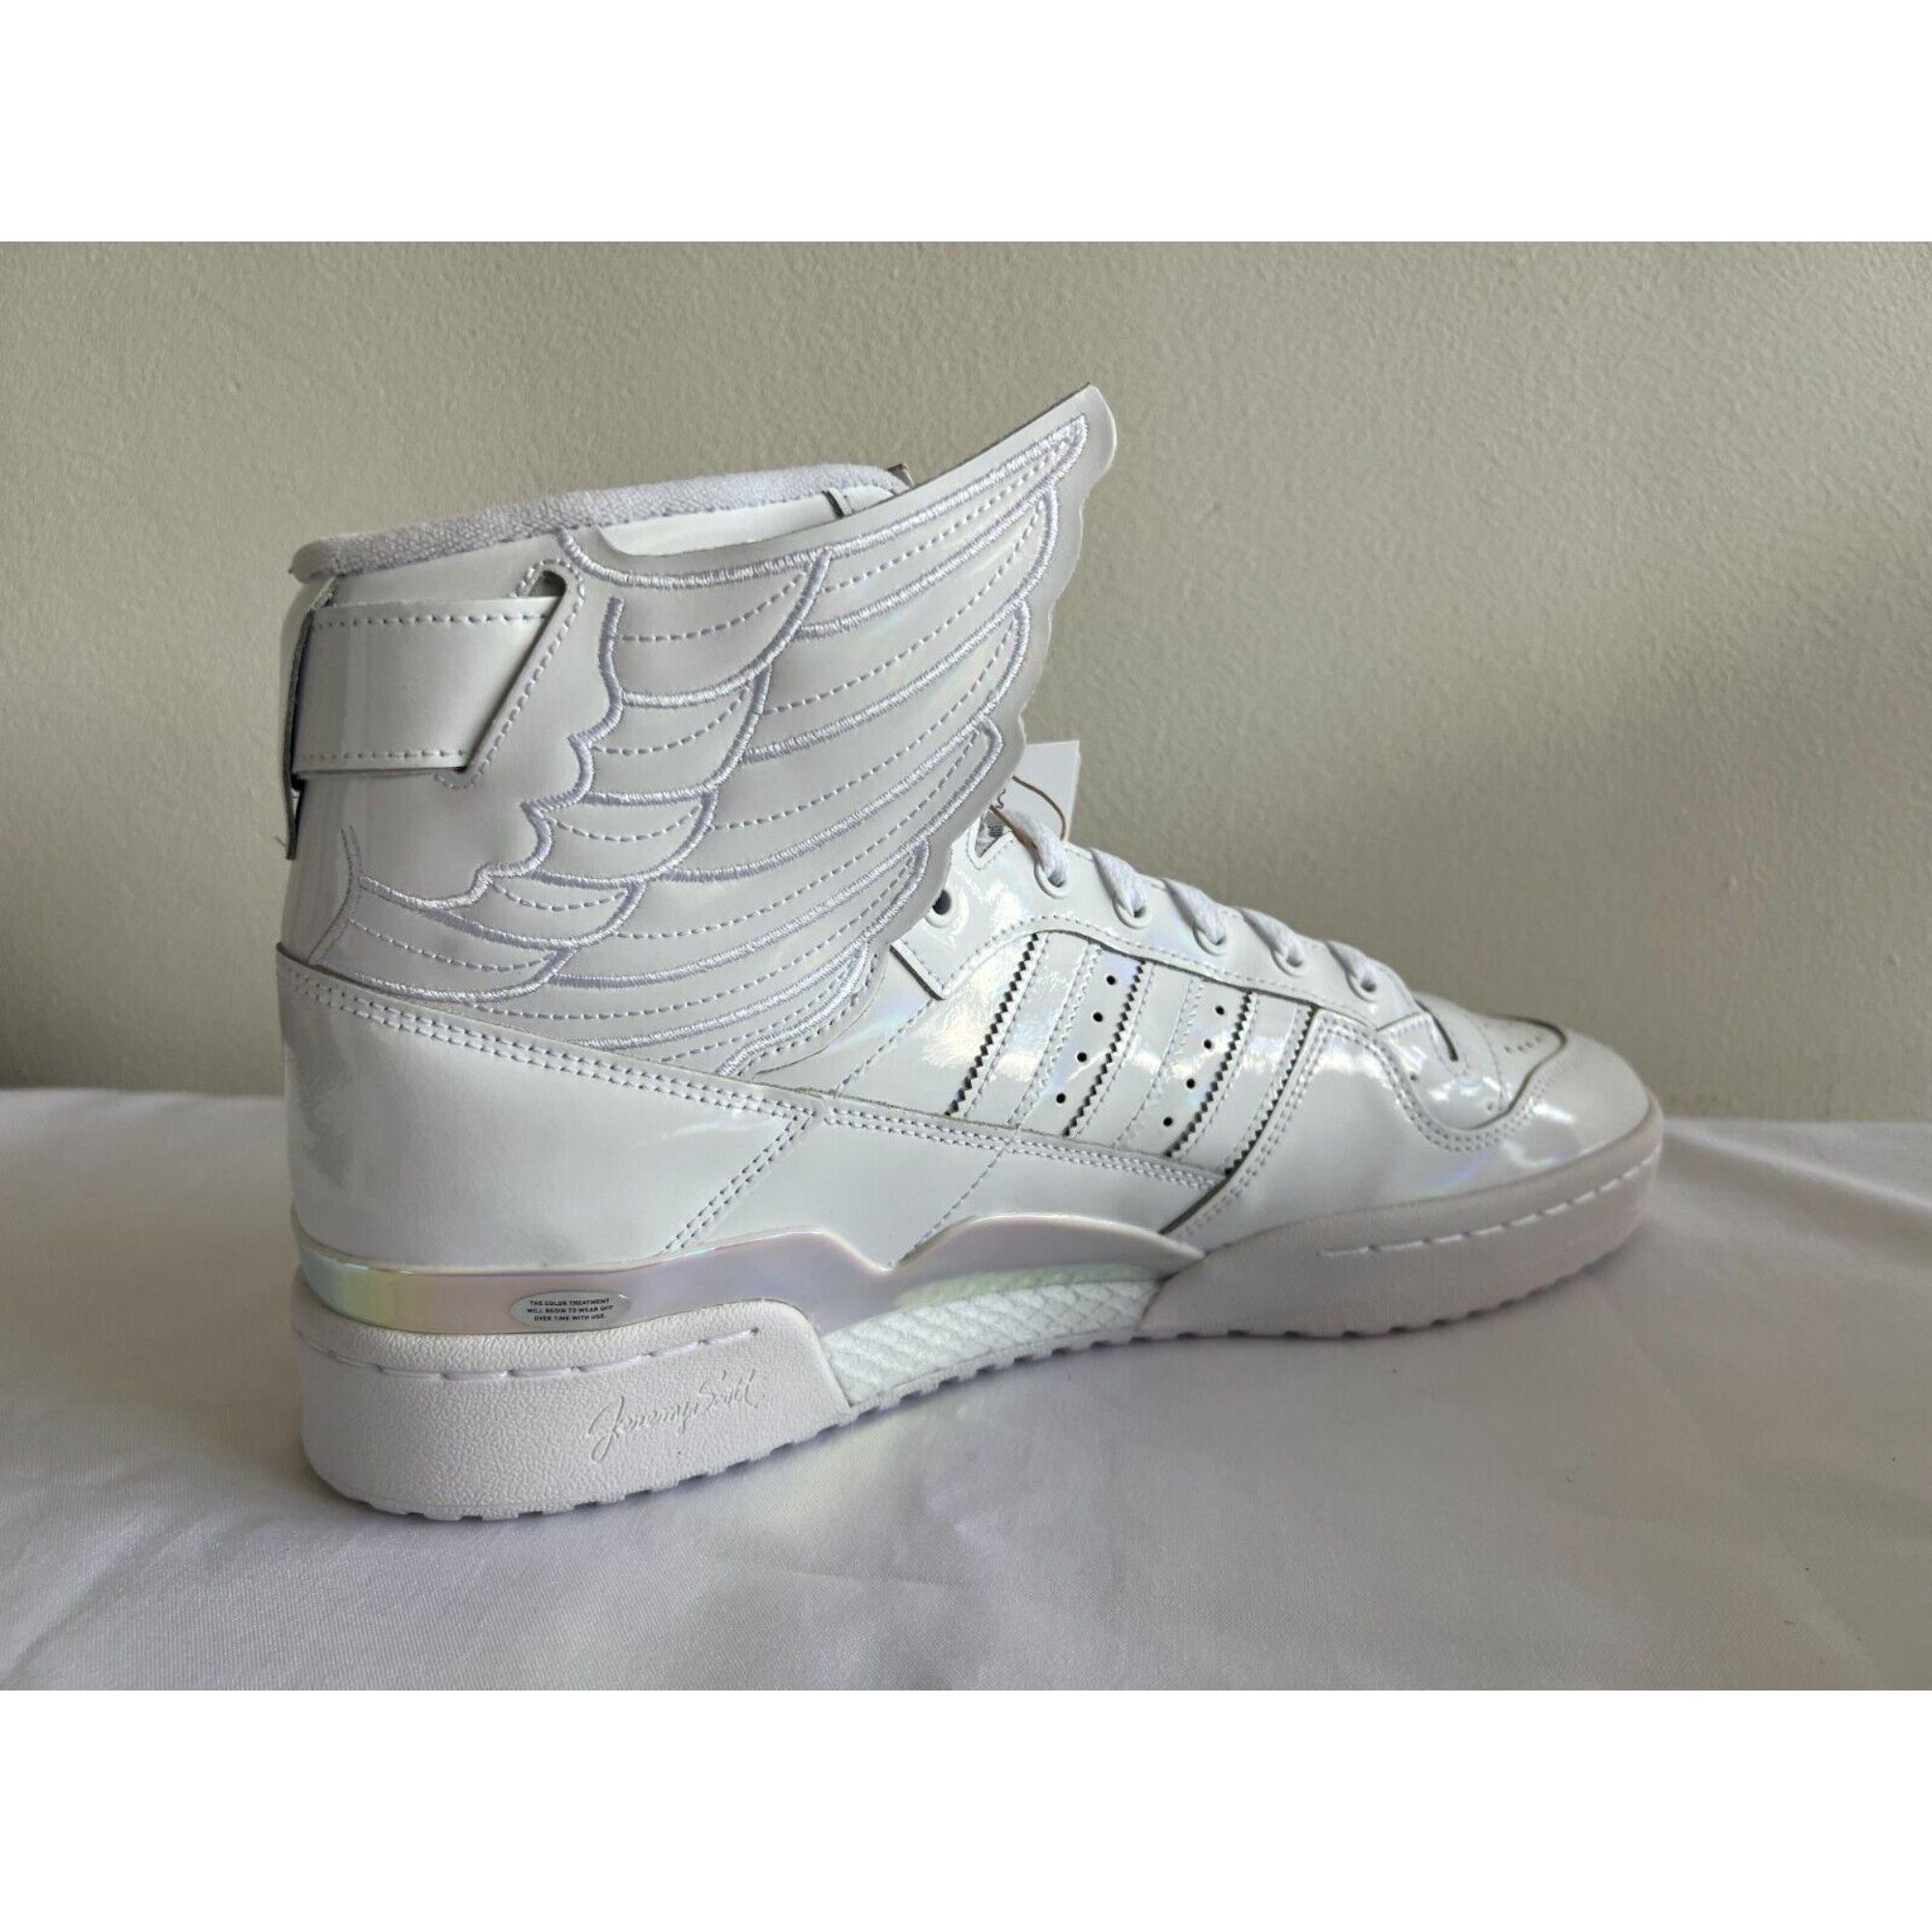 Adidas Originals ObyO Jeremy Scott Wings 4.0 Core Cloud White / Black Sneakers

Additional Information:
Material: Synthetic Leather
Color: White
Size: 12
Style: White
Pattern: Solid
Condition: Brand new in the original box*
Available in other size